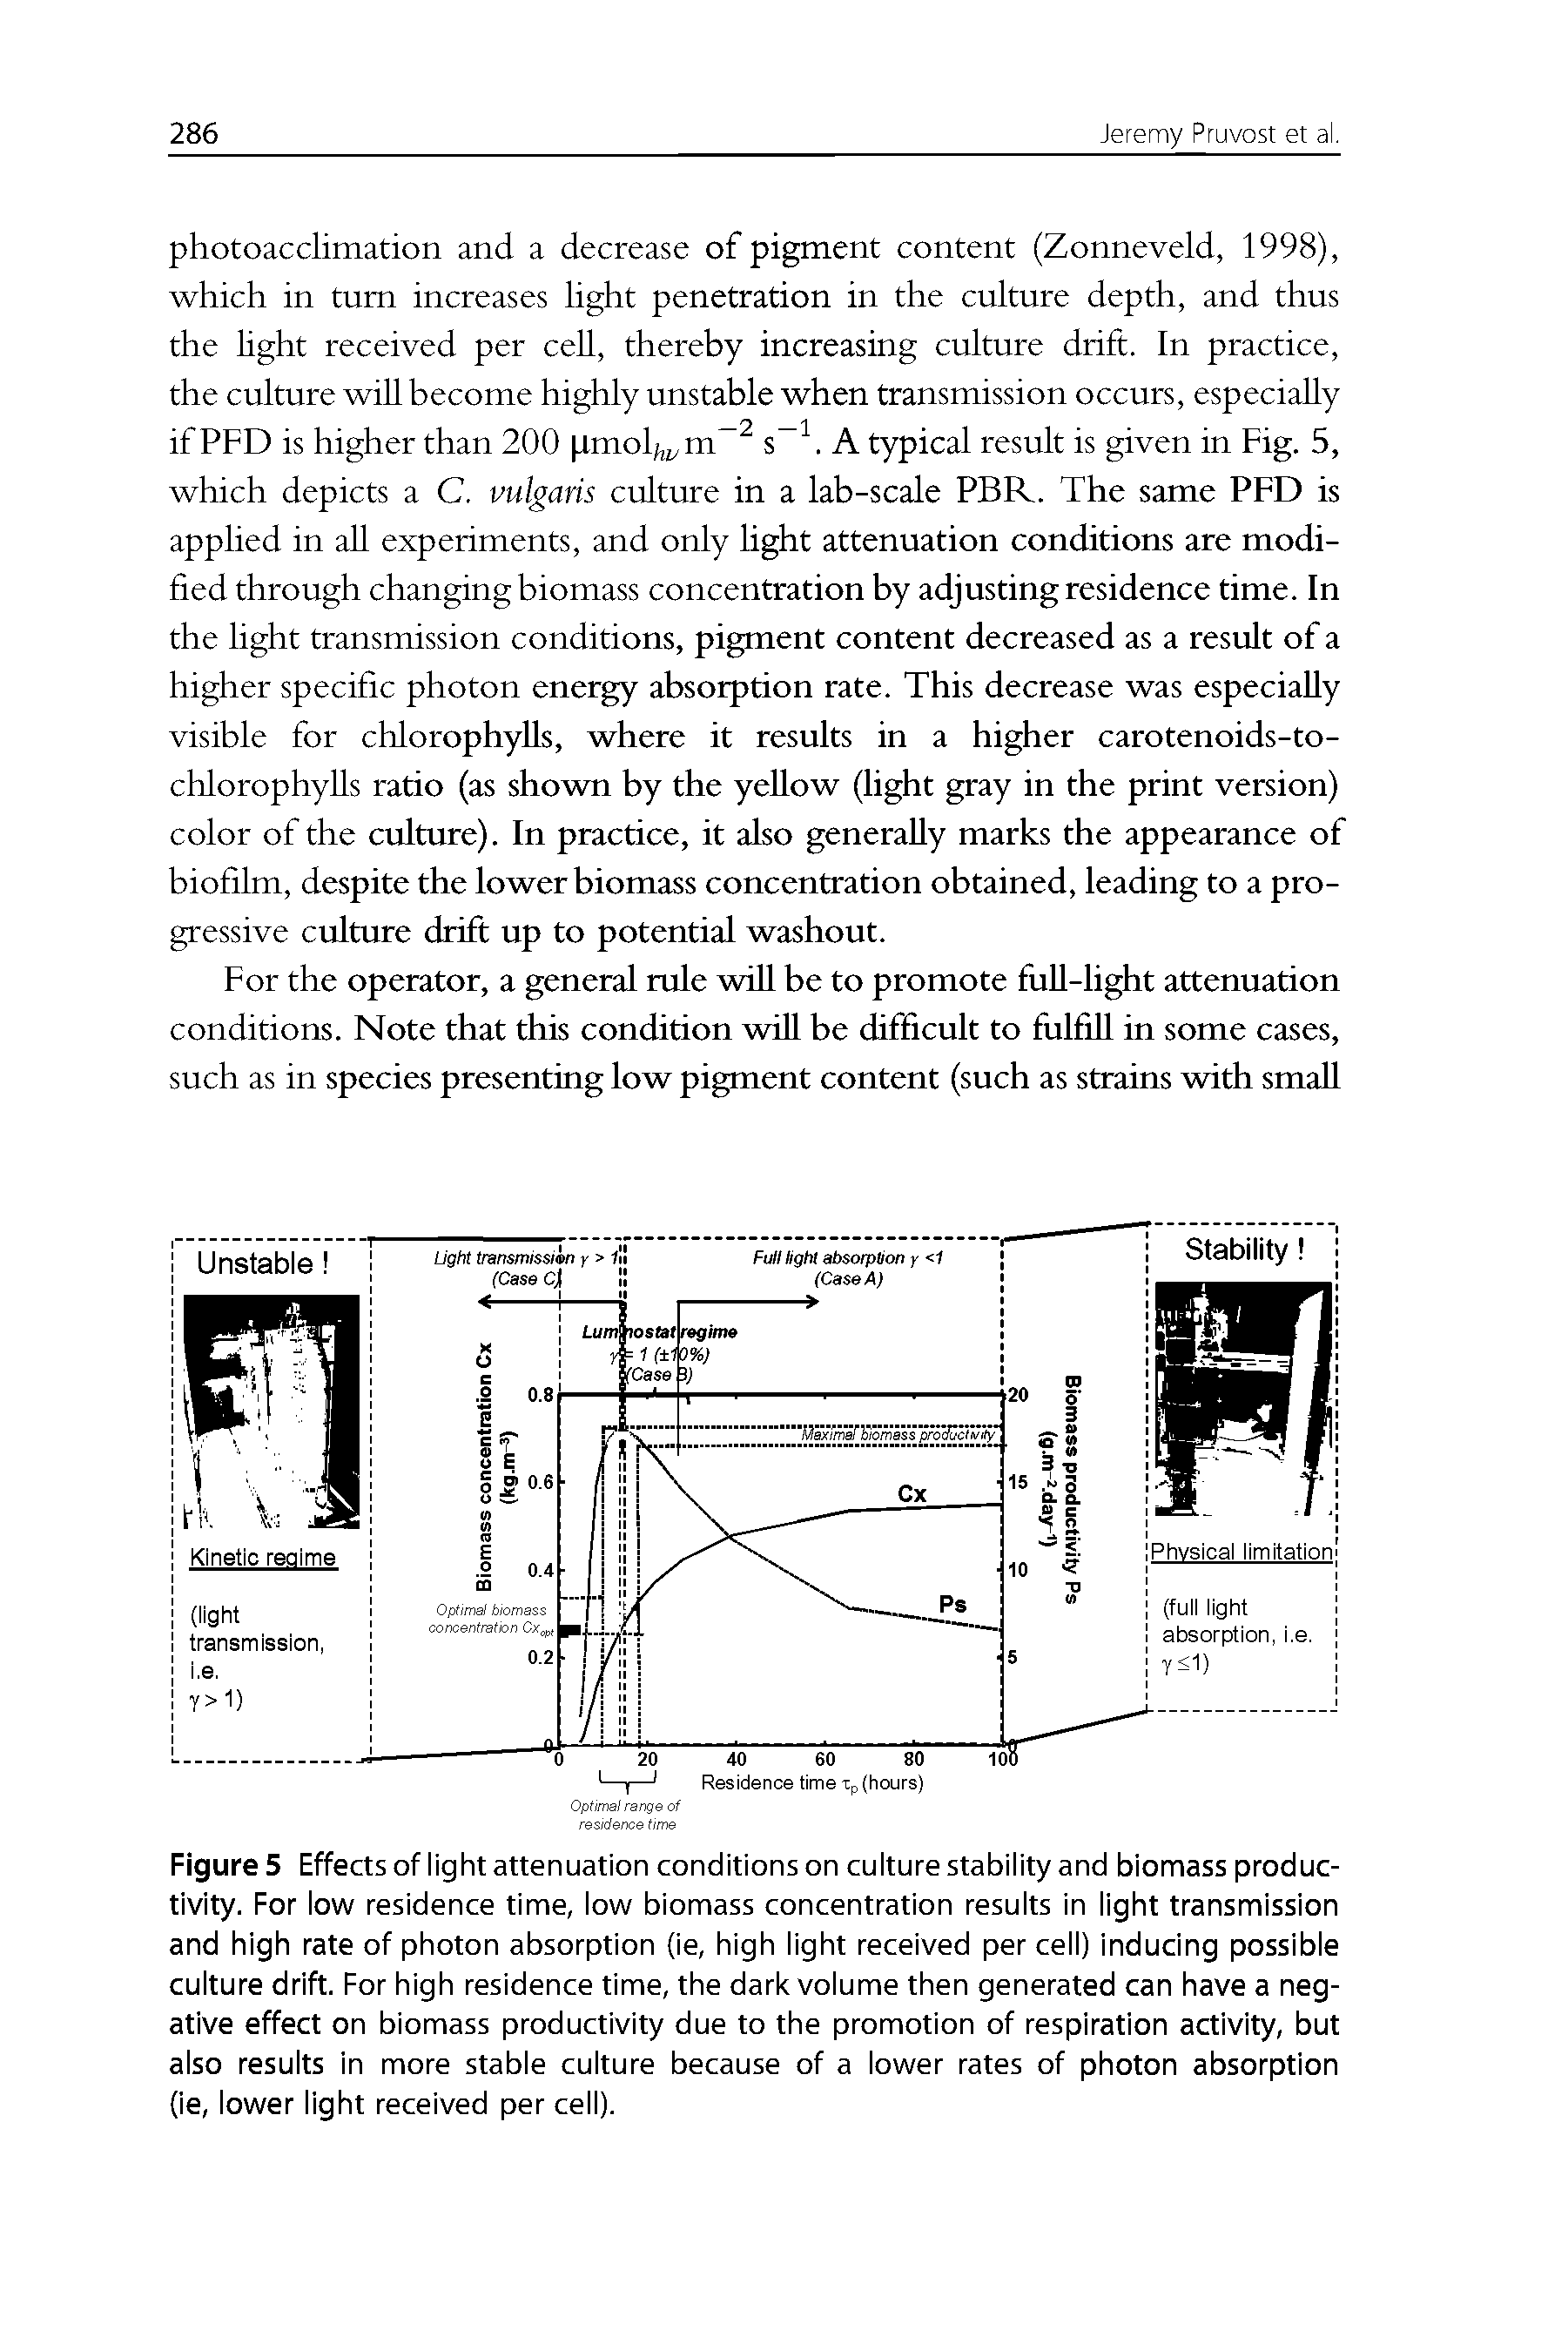 Figure 5 Effects of light attenuation conditions on culture stability and biomass productivity. For low residence time, low biomass concentration results in light transmission and high rate of photon absorption (ie, high light received per cell) inducing possible culture drift. For high residence time, the dark volume then generated can have a negative effect on biomass productivity due to the promotion of respiration activity, but also results in more stable culture because of a lower rates of photon absorption (ie, lower light received per cell).